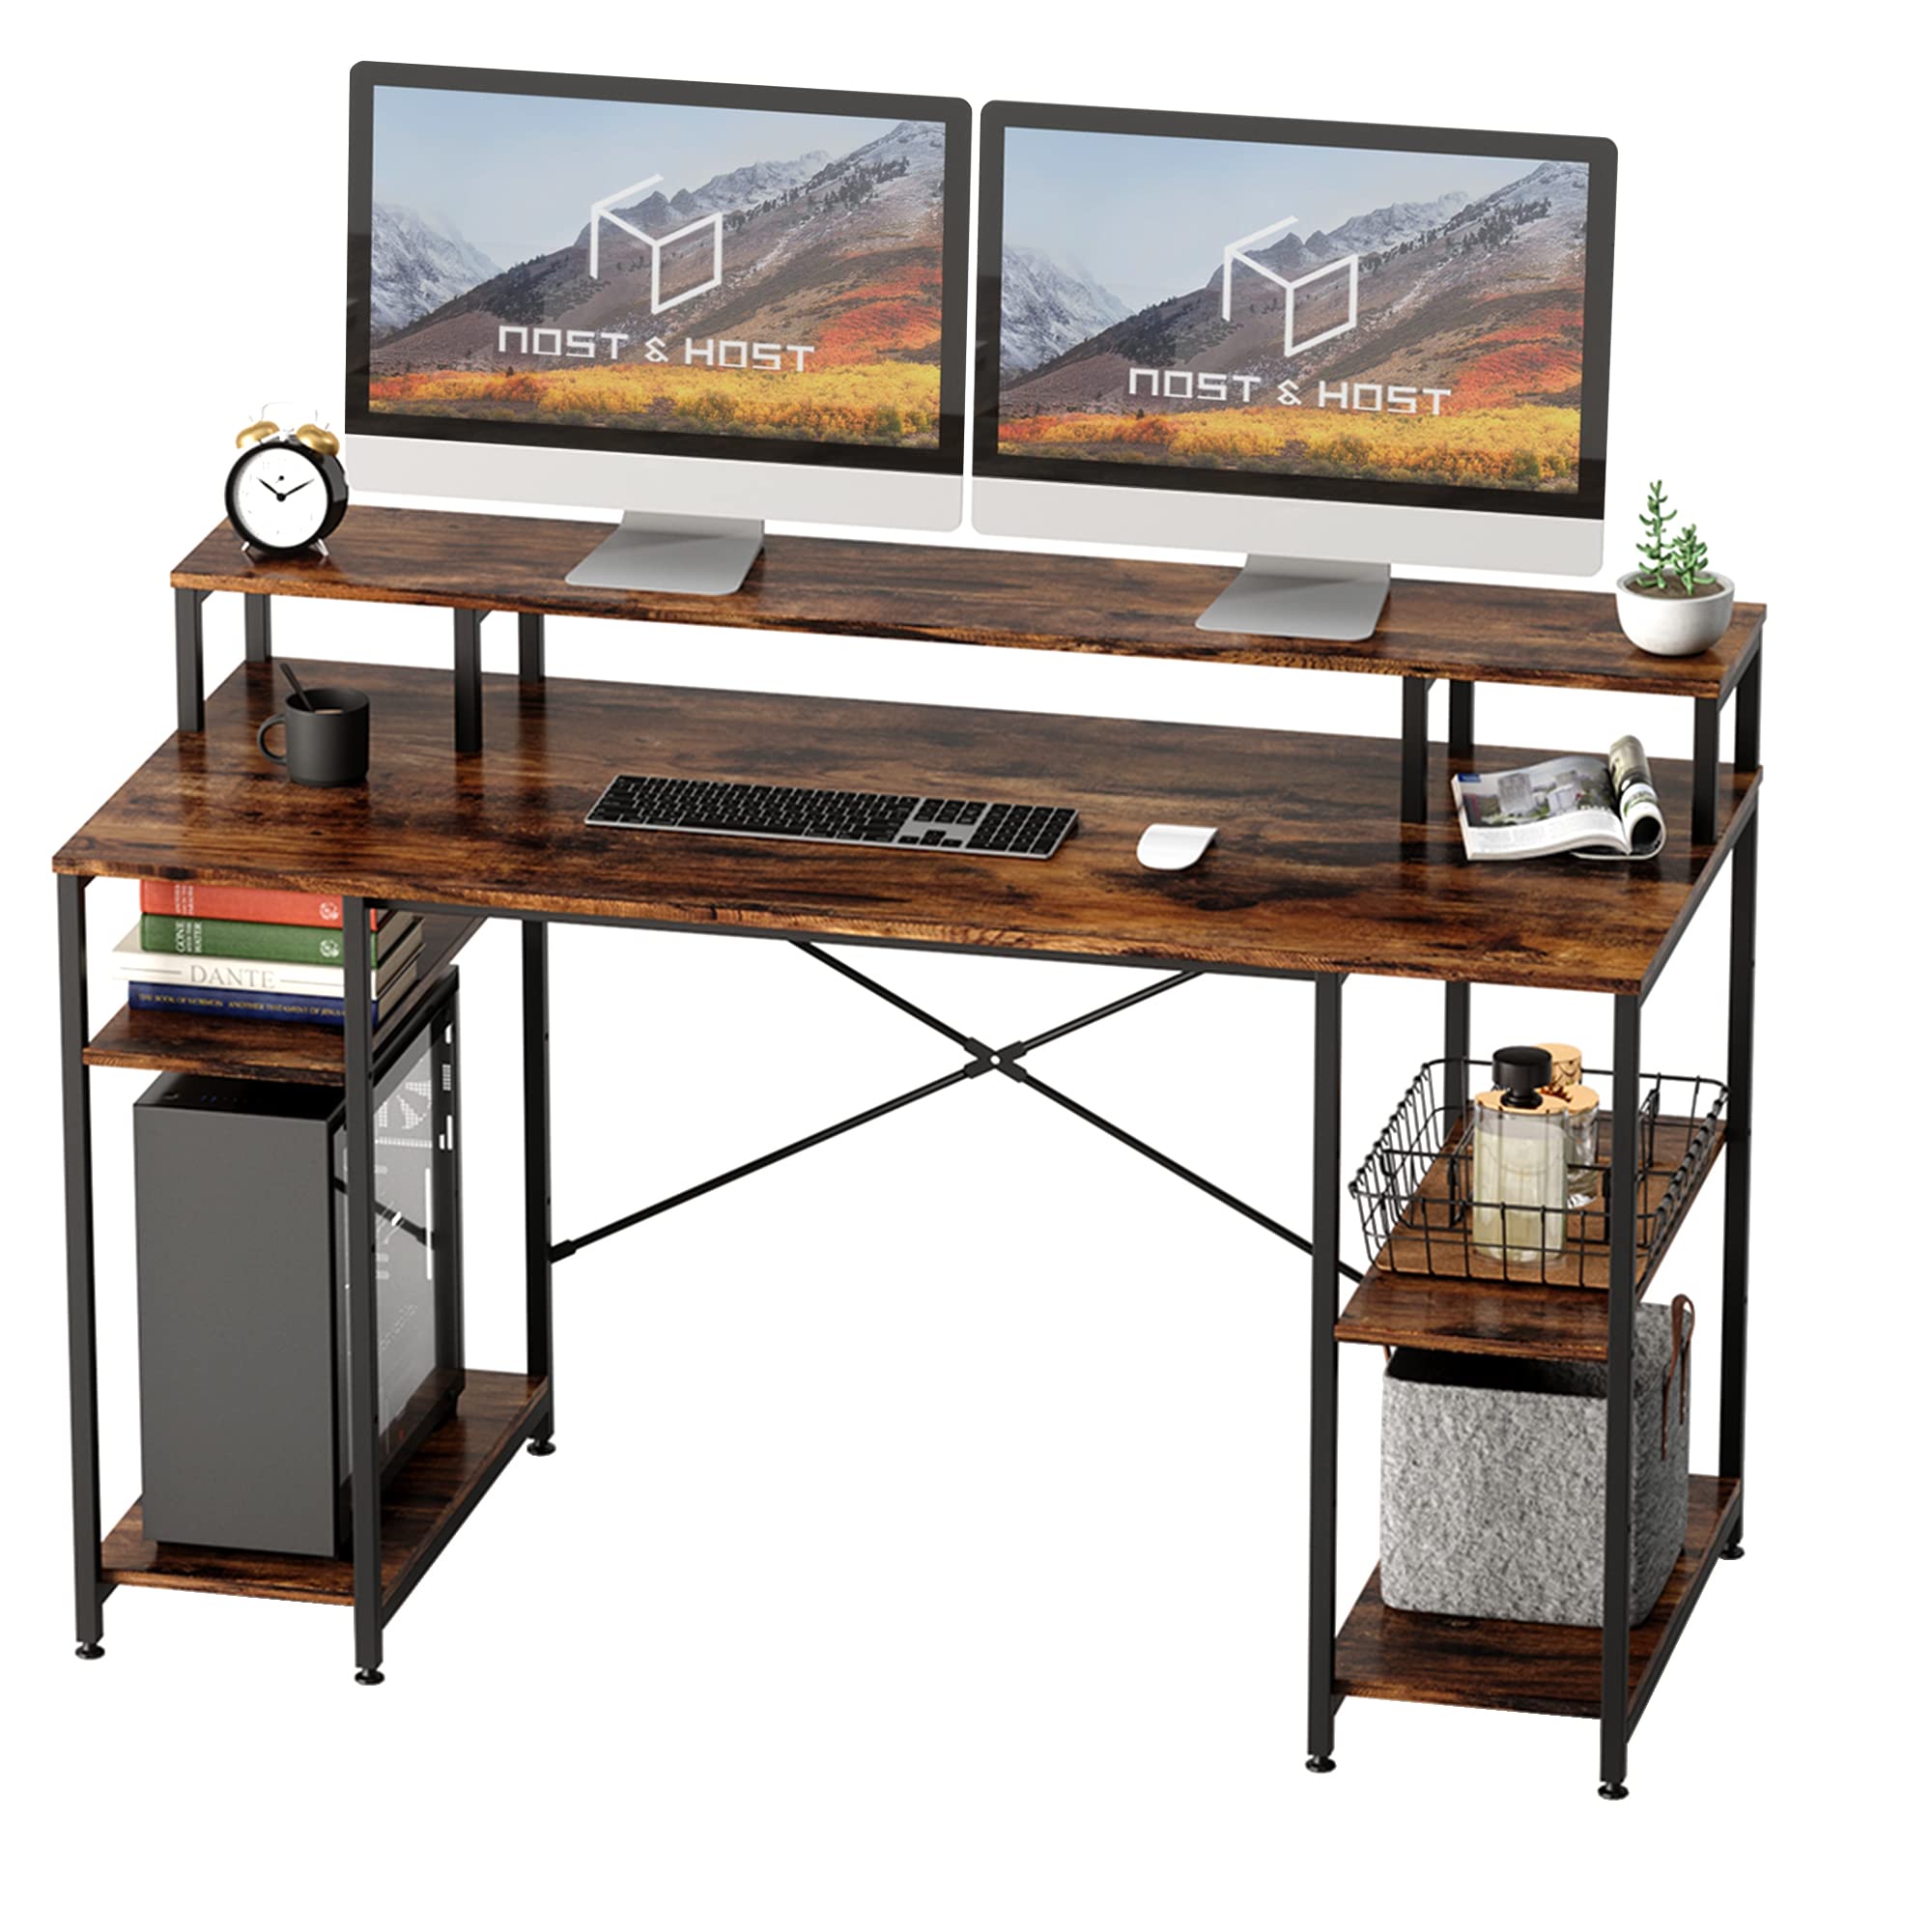 Nost & Host 55 Inch Dual Monitor Desk, Computer Desk with Monitor Shelf and Storage Shelves, 2-Tier Industrial Office Desk Sturdy Writing Gaming St...